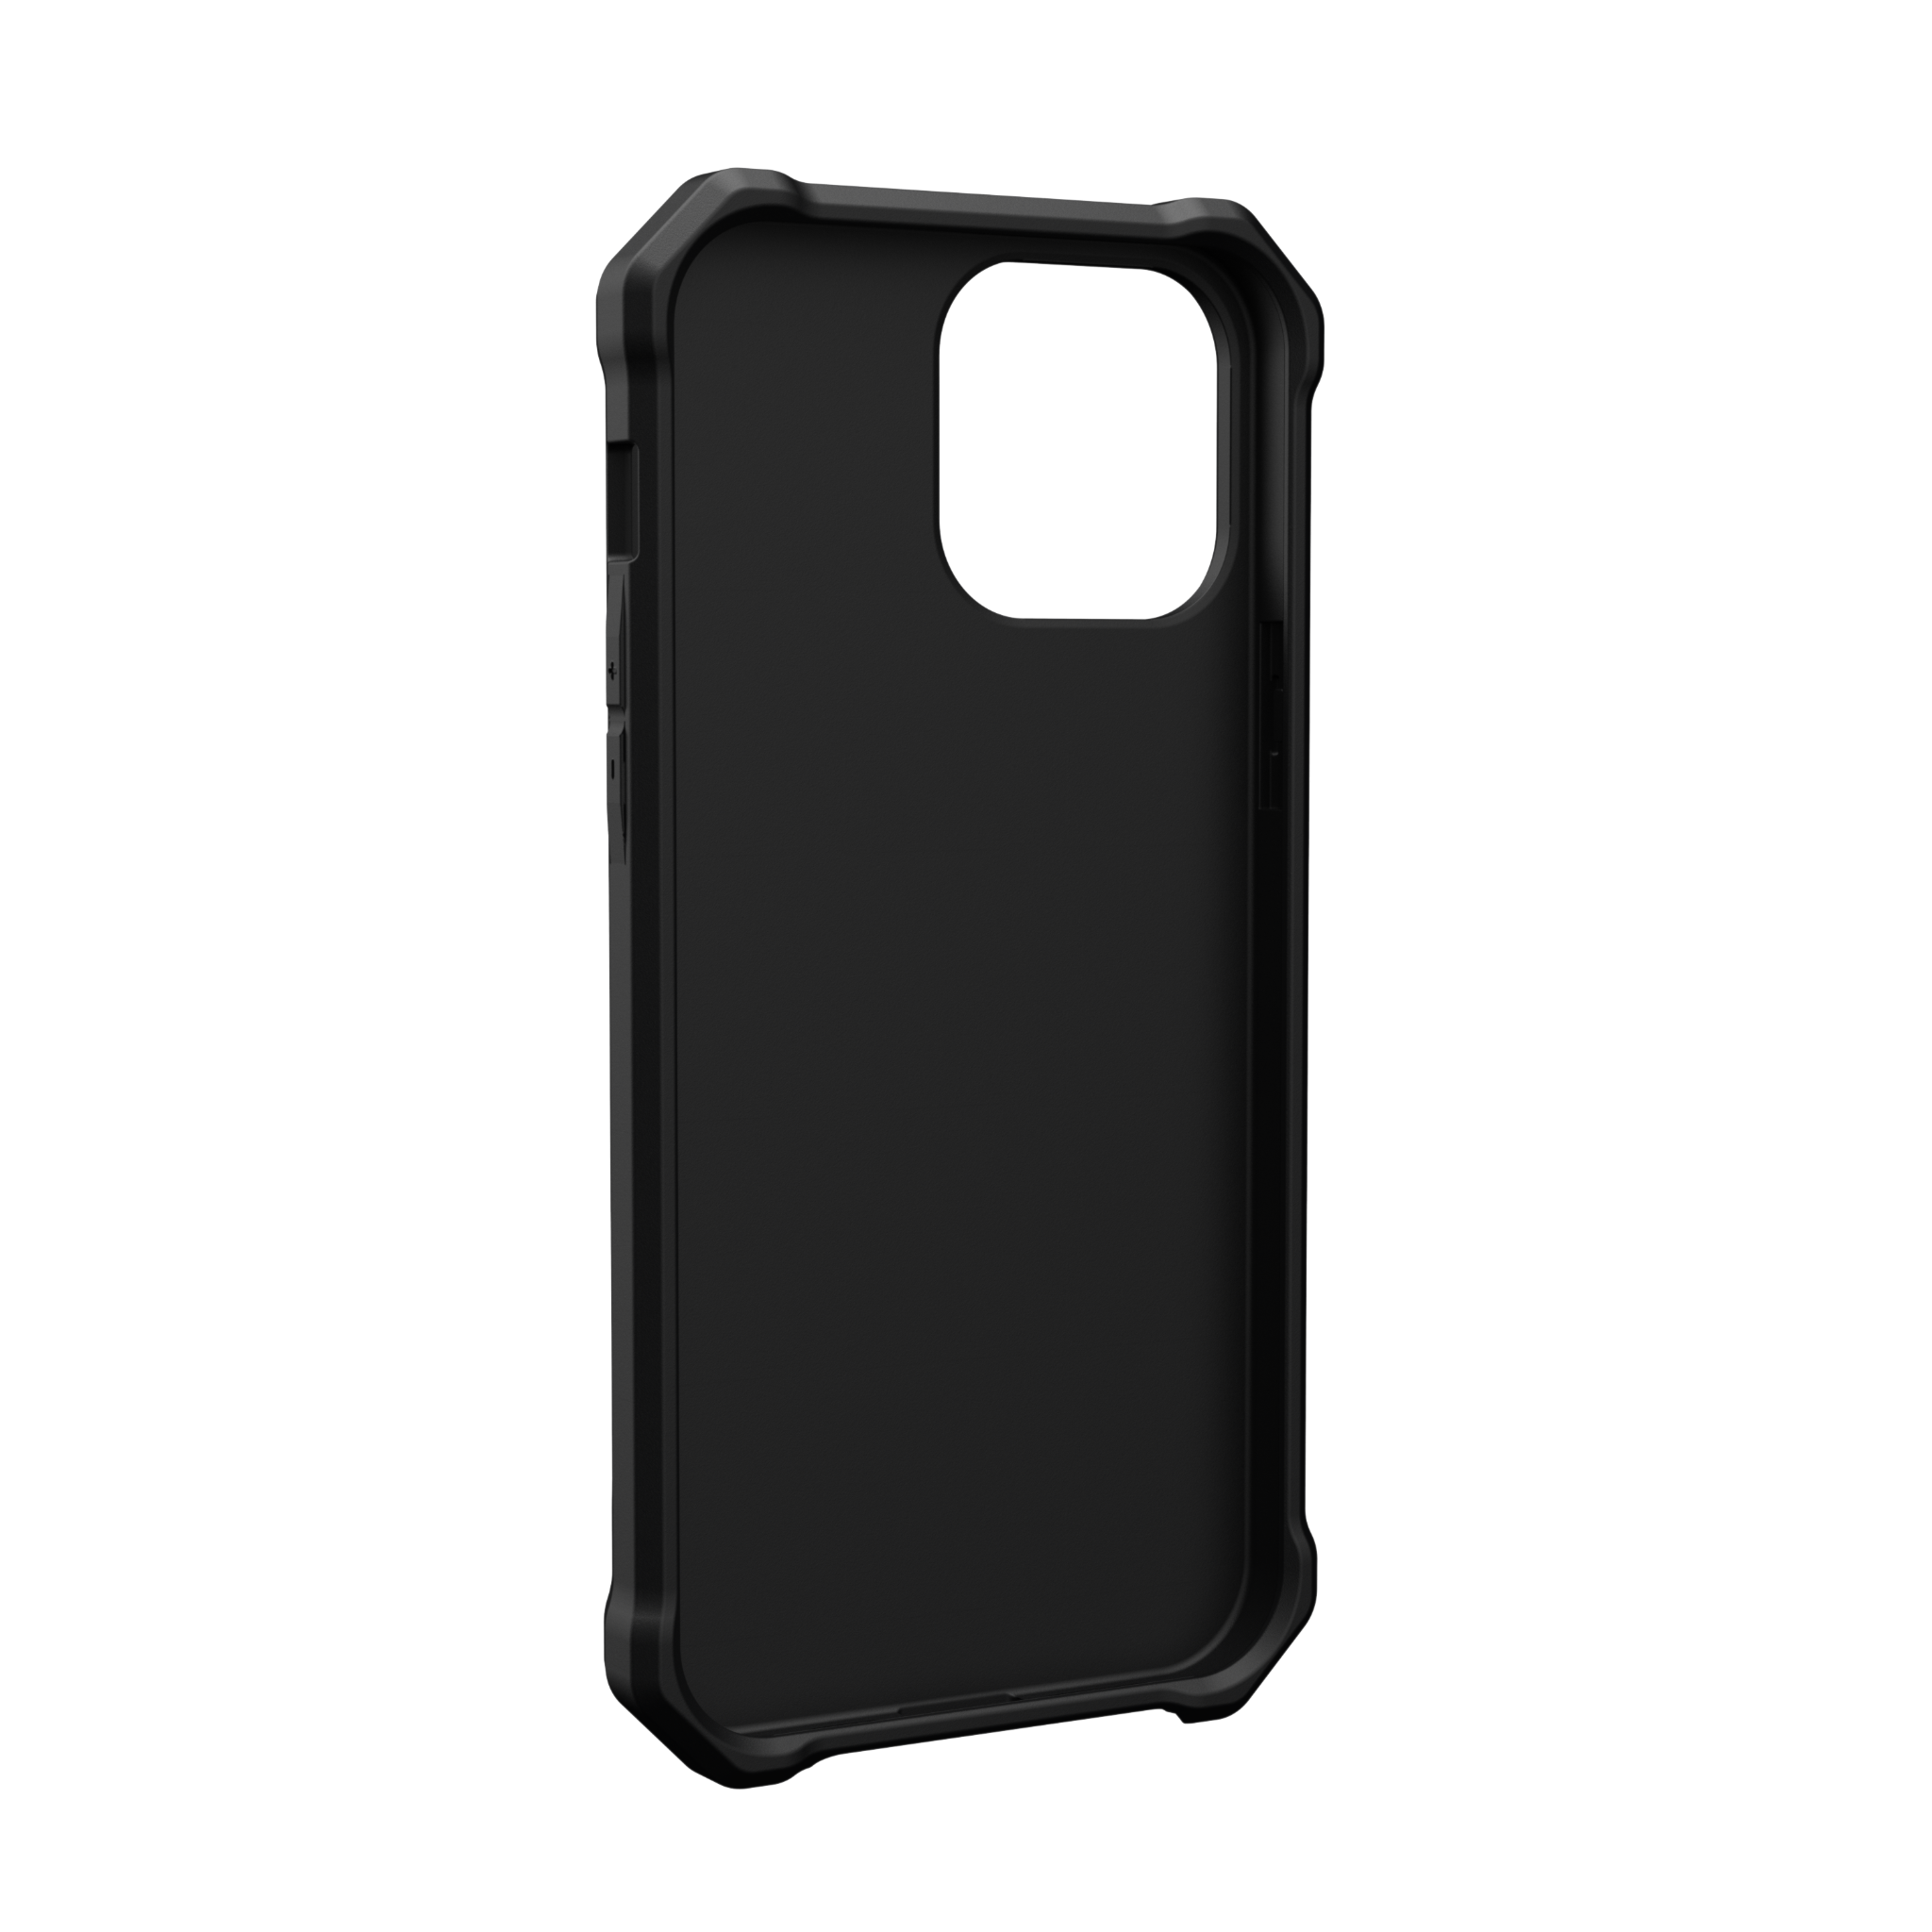  Ốp lưng Essential Armor cho iPhone 13 Pro Max [6.7 inch] 